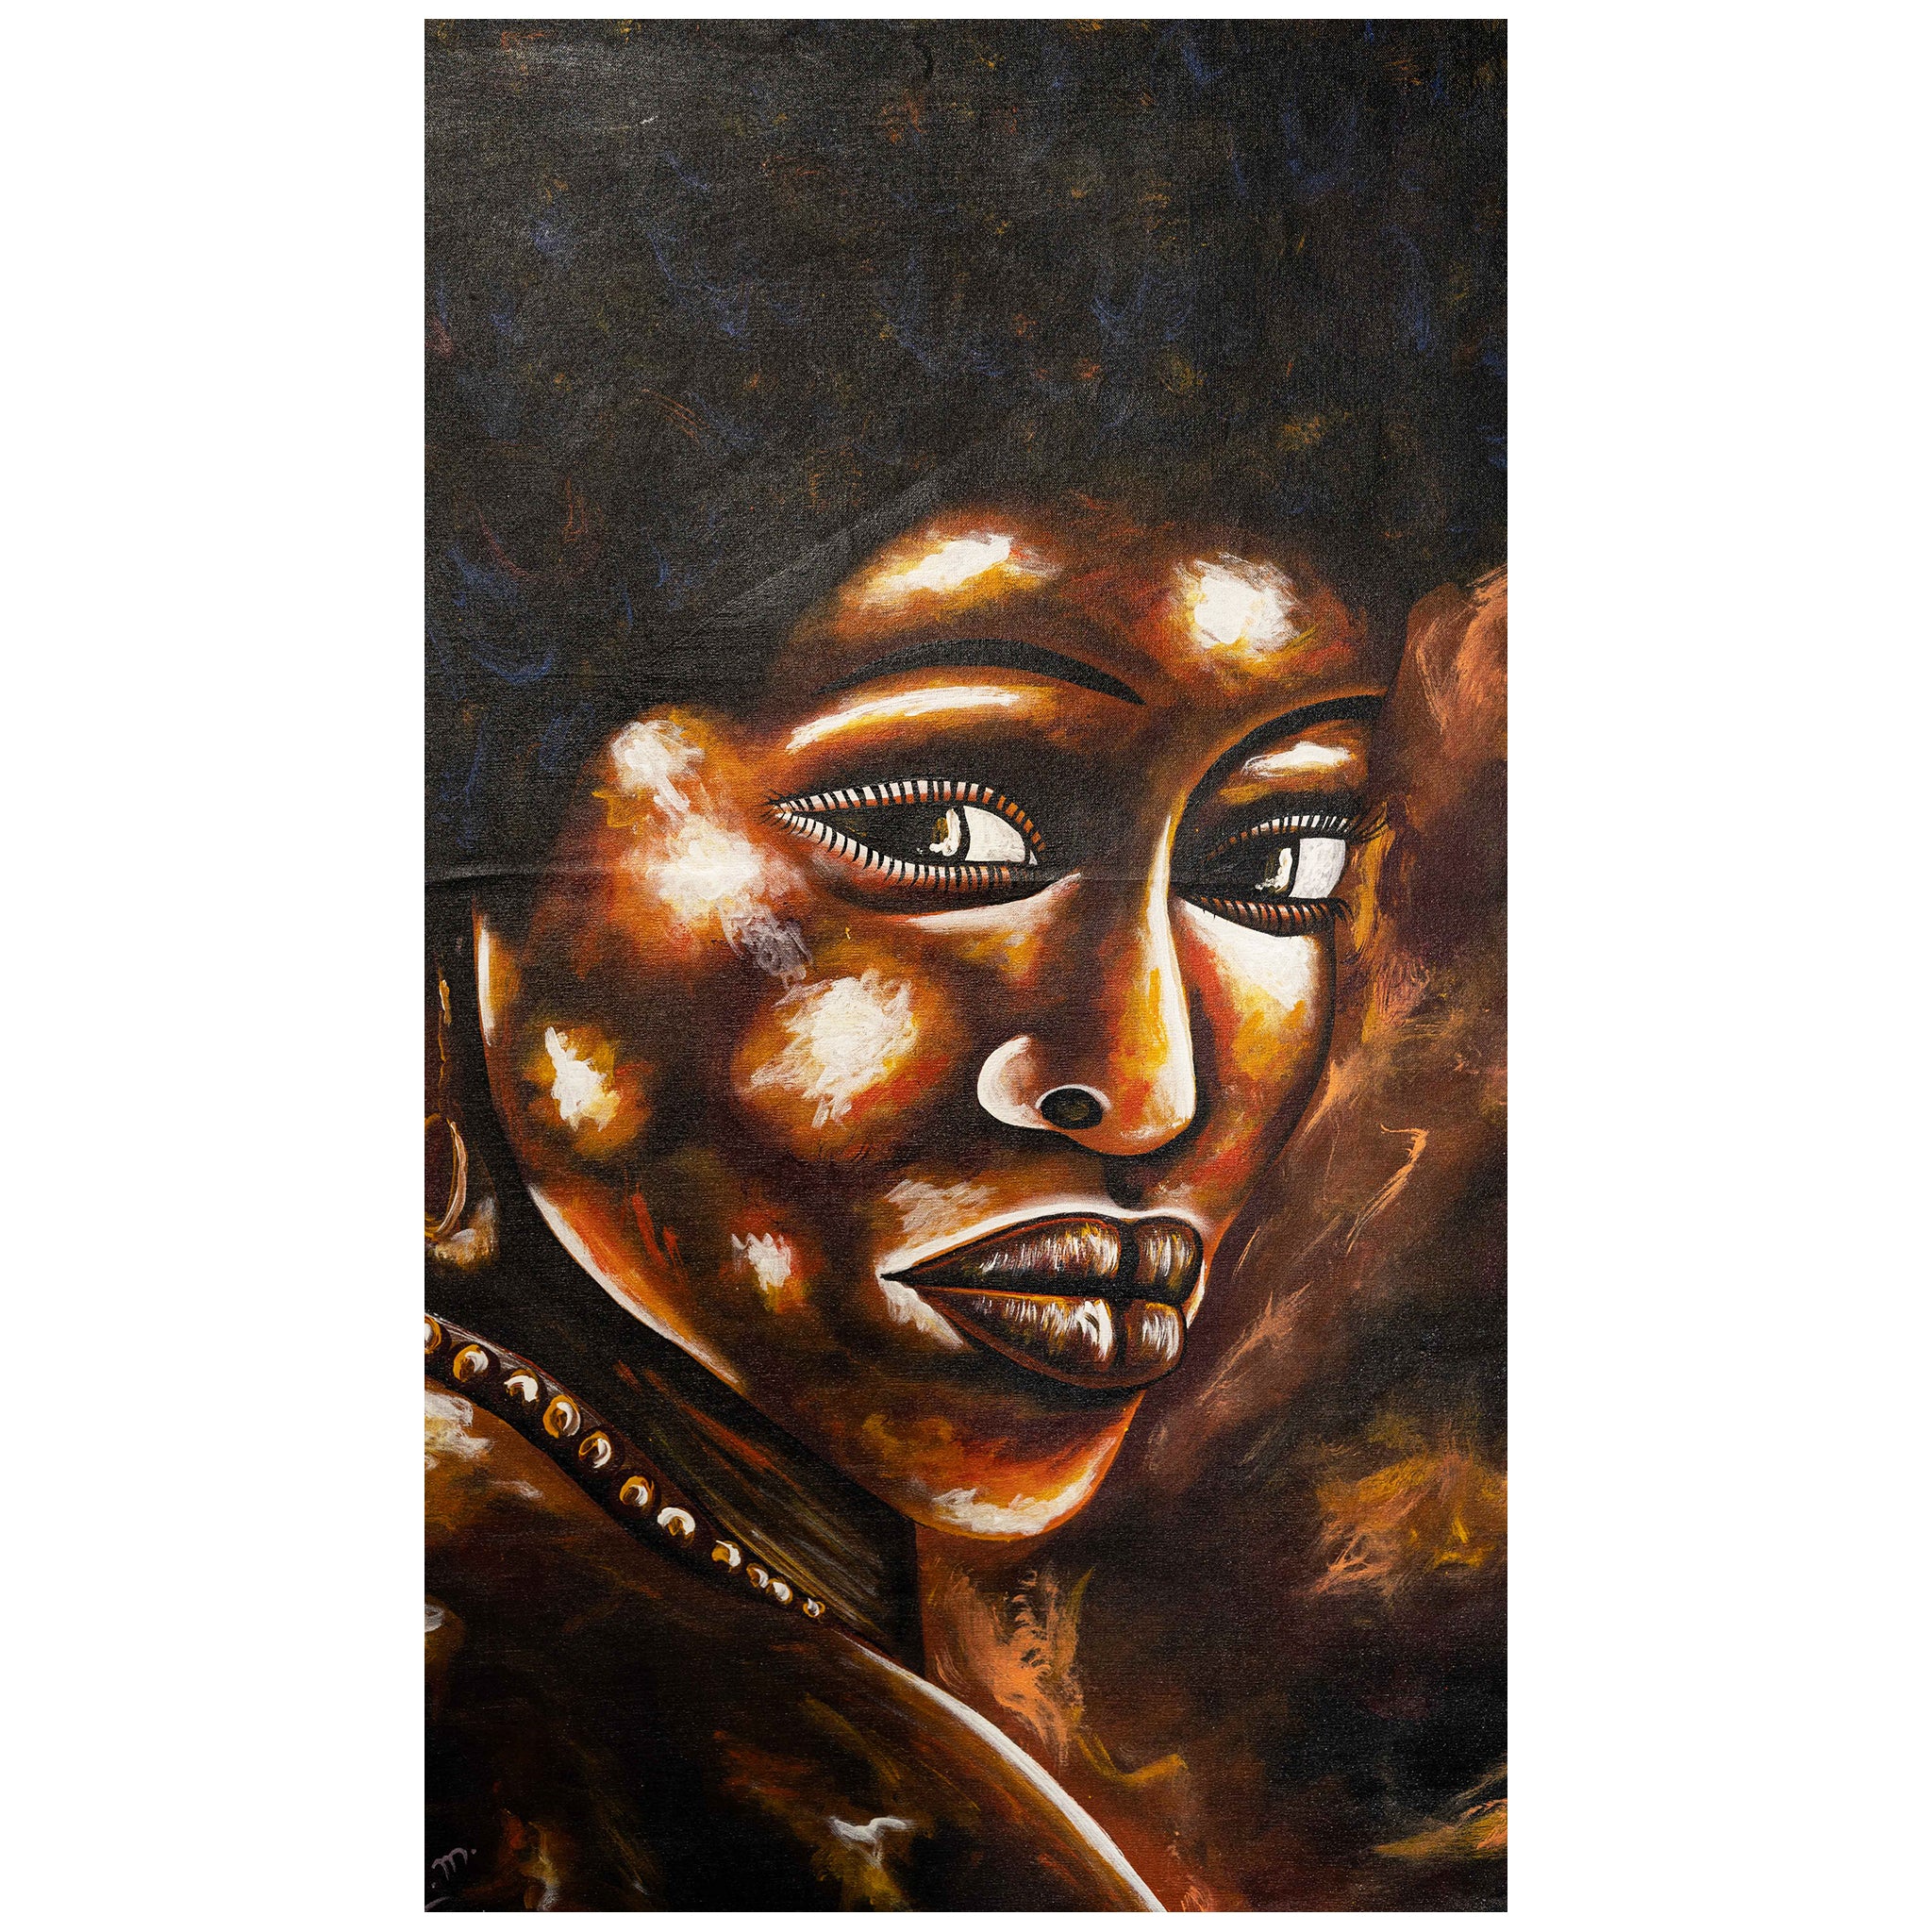 The Afro man - Authentic African handicrafts | Clothing, bags, painting, toys & more - CULTURE HUB by Muthoni Unchained